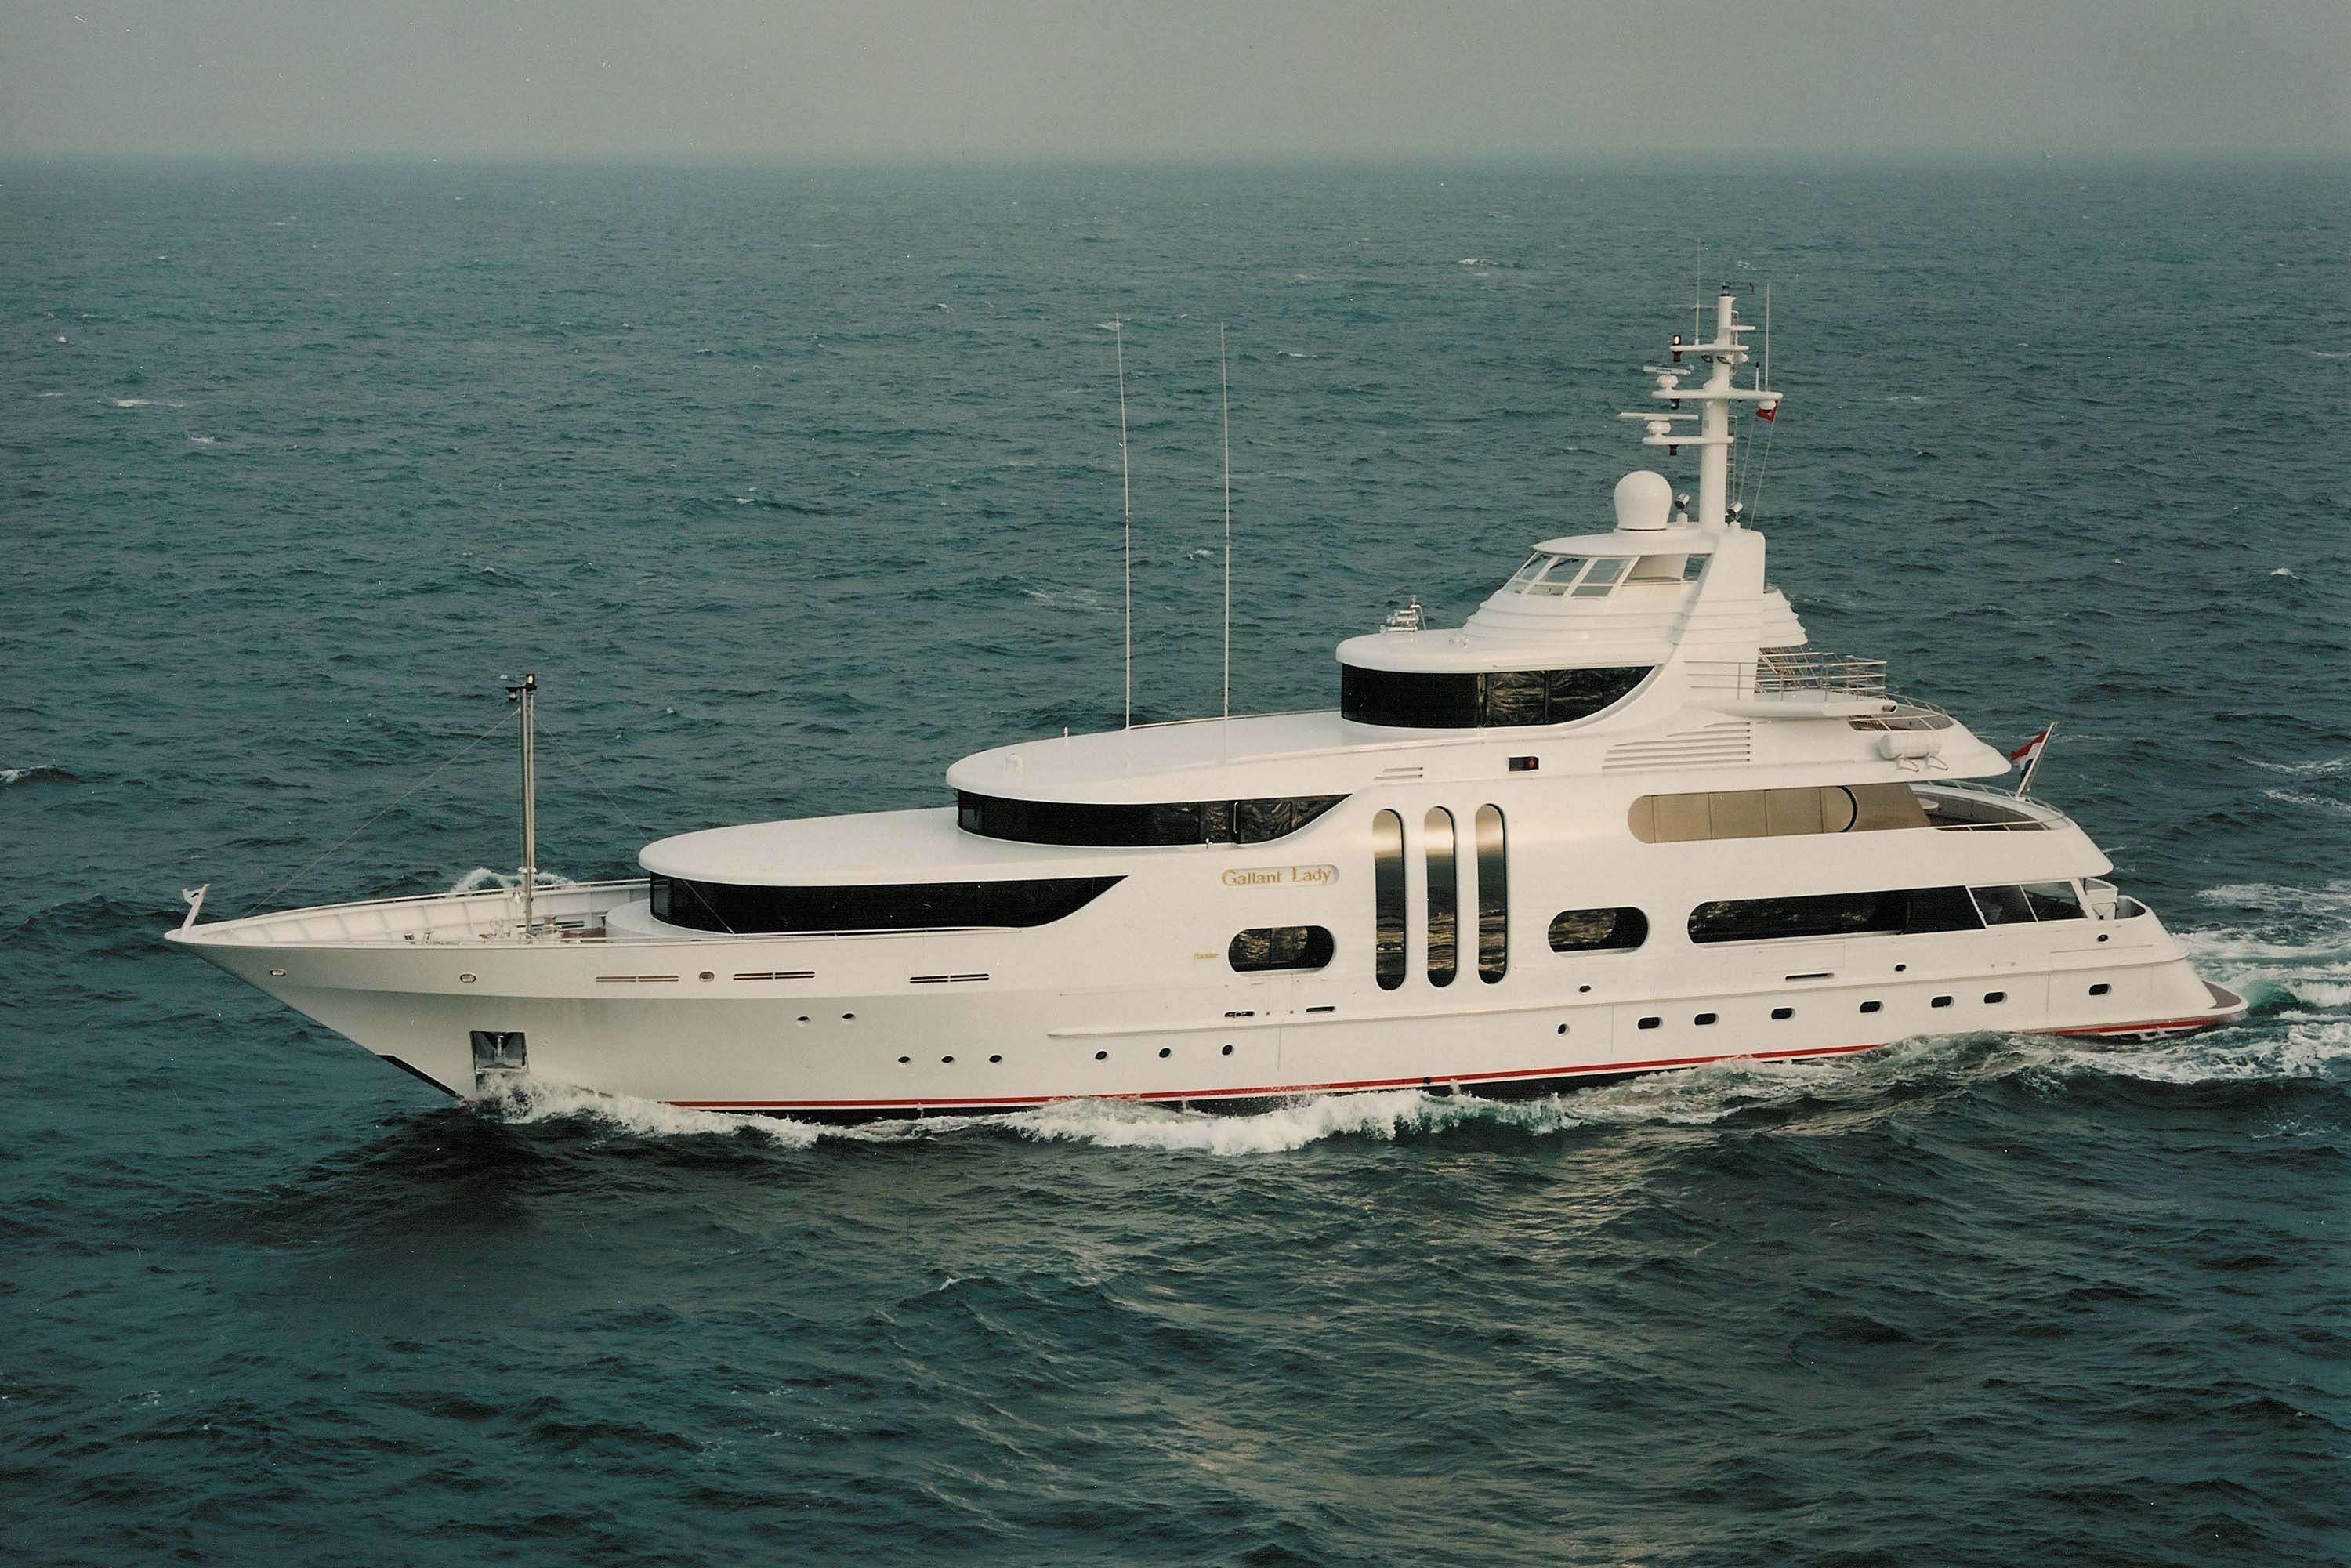 who owns gallant lady yacht